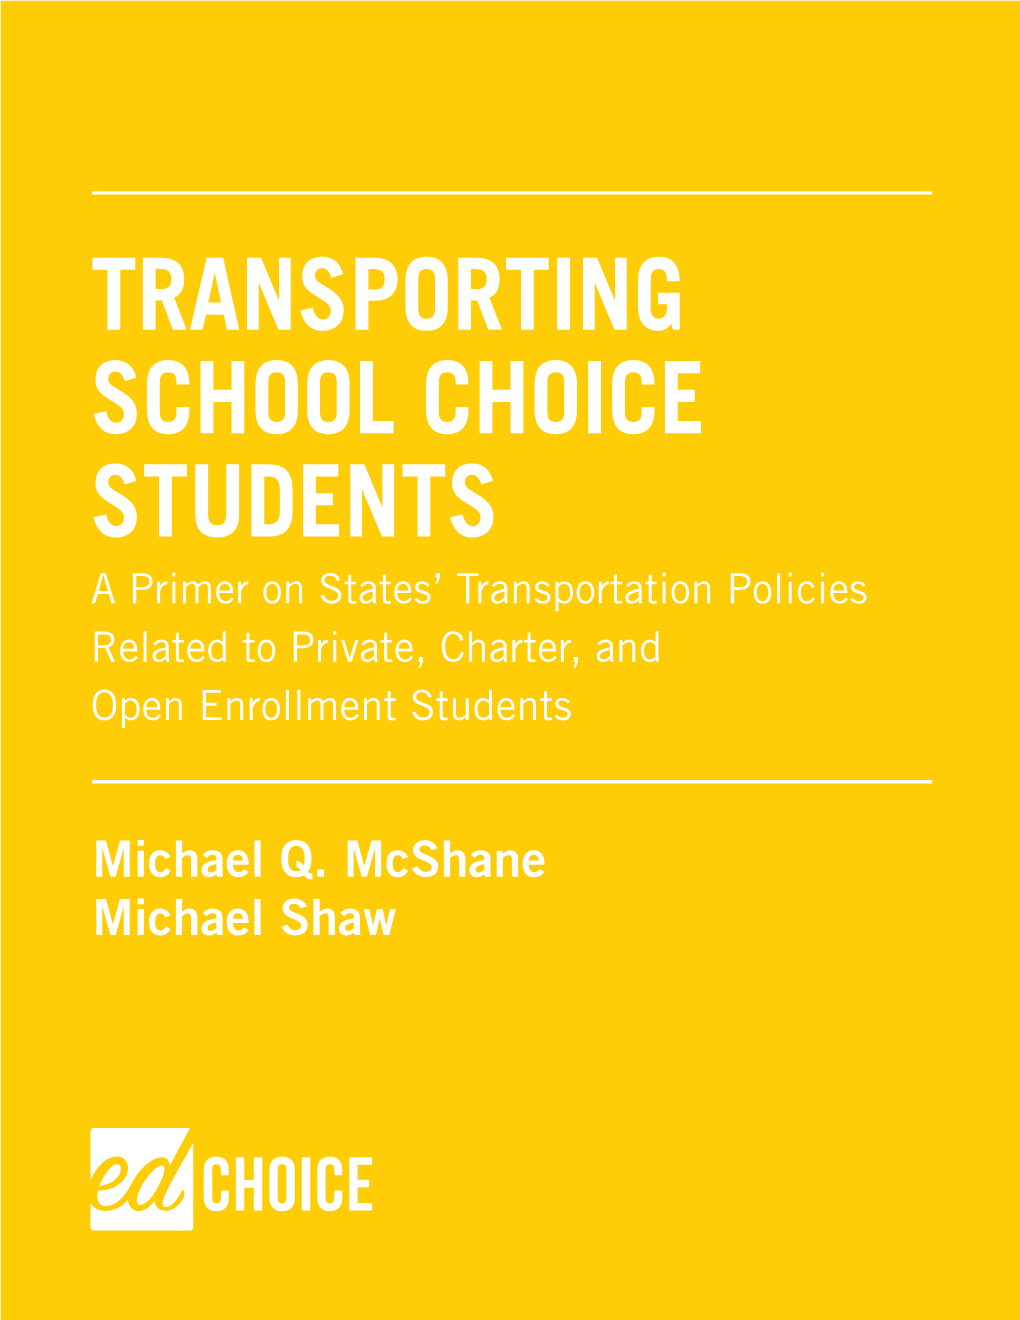 TRANSPORTING SCHOOL CHOICE STUDENTS a Primer on States’ Transportation Policies Related to Private, Charter, and Open Enrollment Students